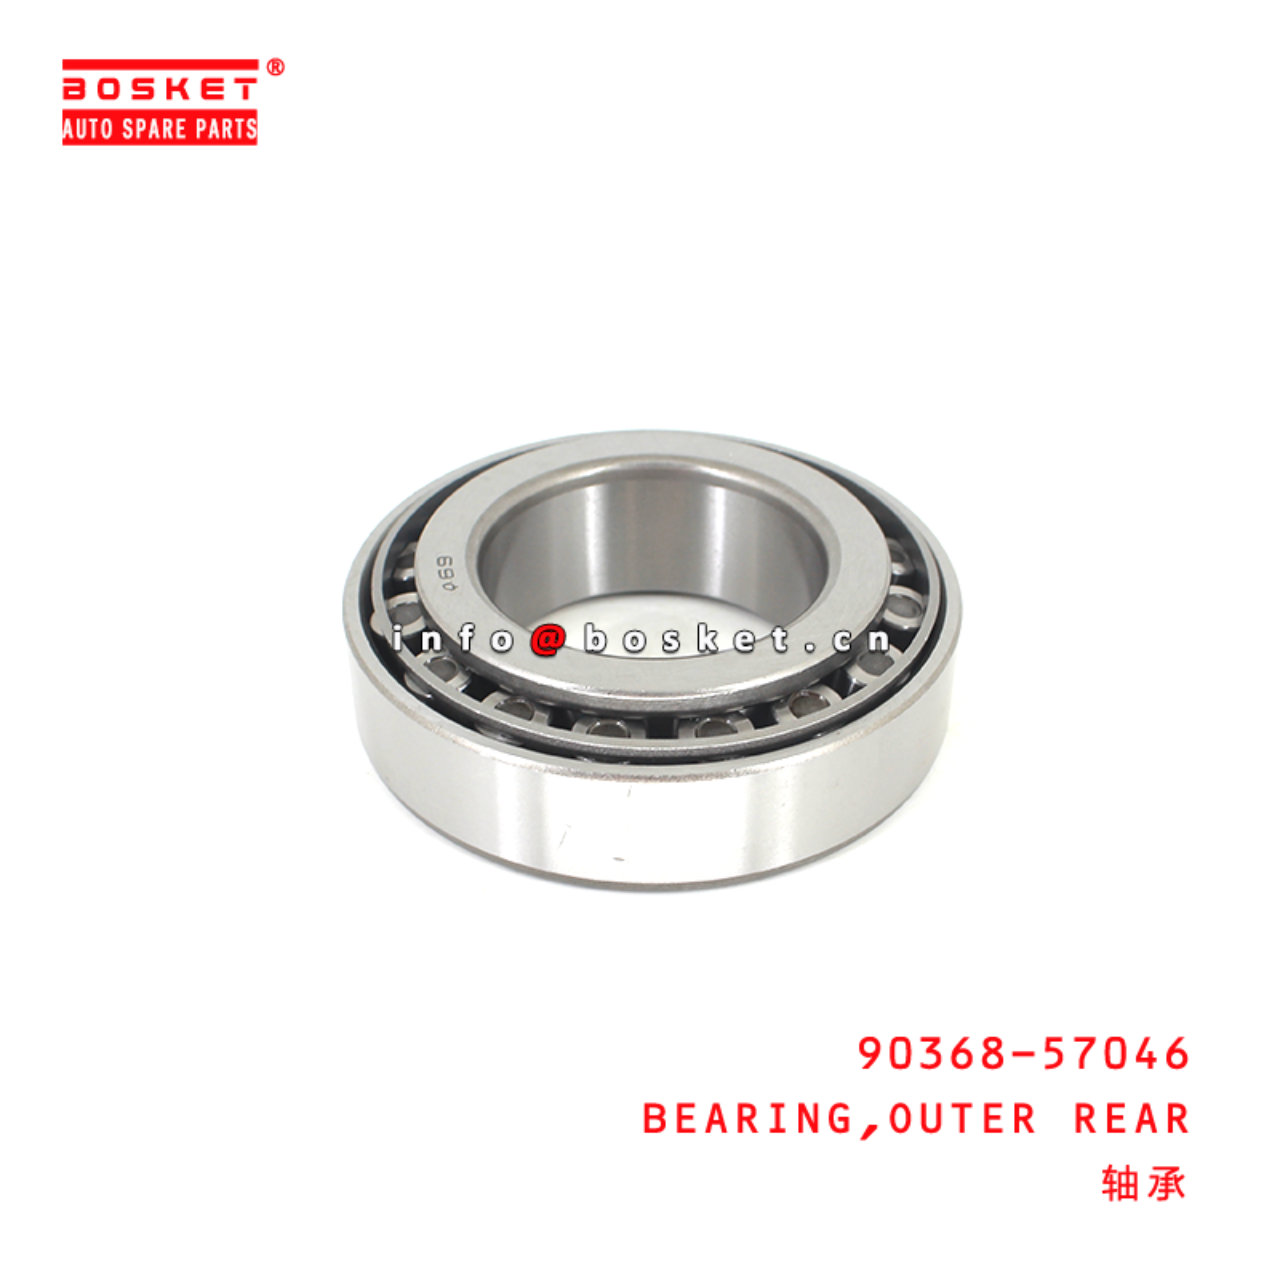 90368-57046 Outer Rear Bearing Suitable for ISUZU HINO700